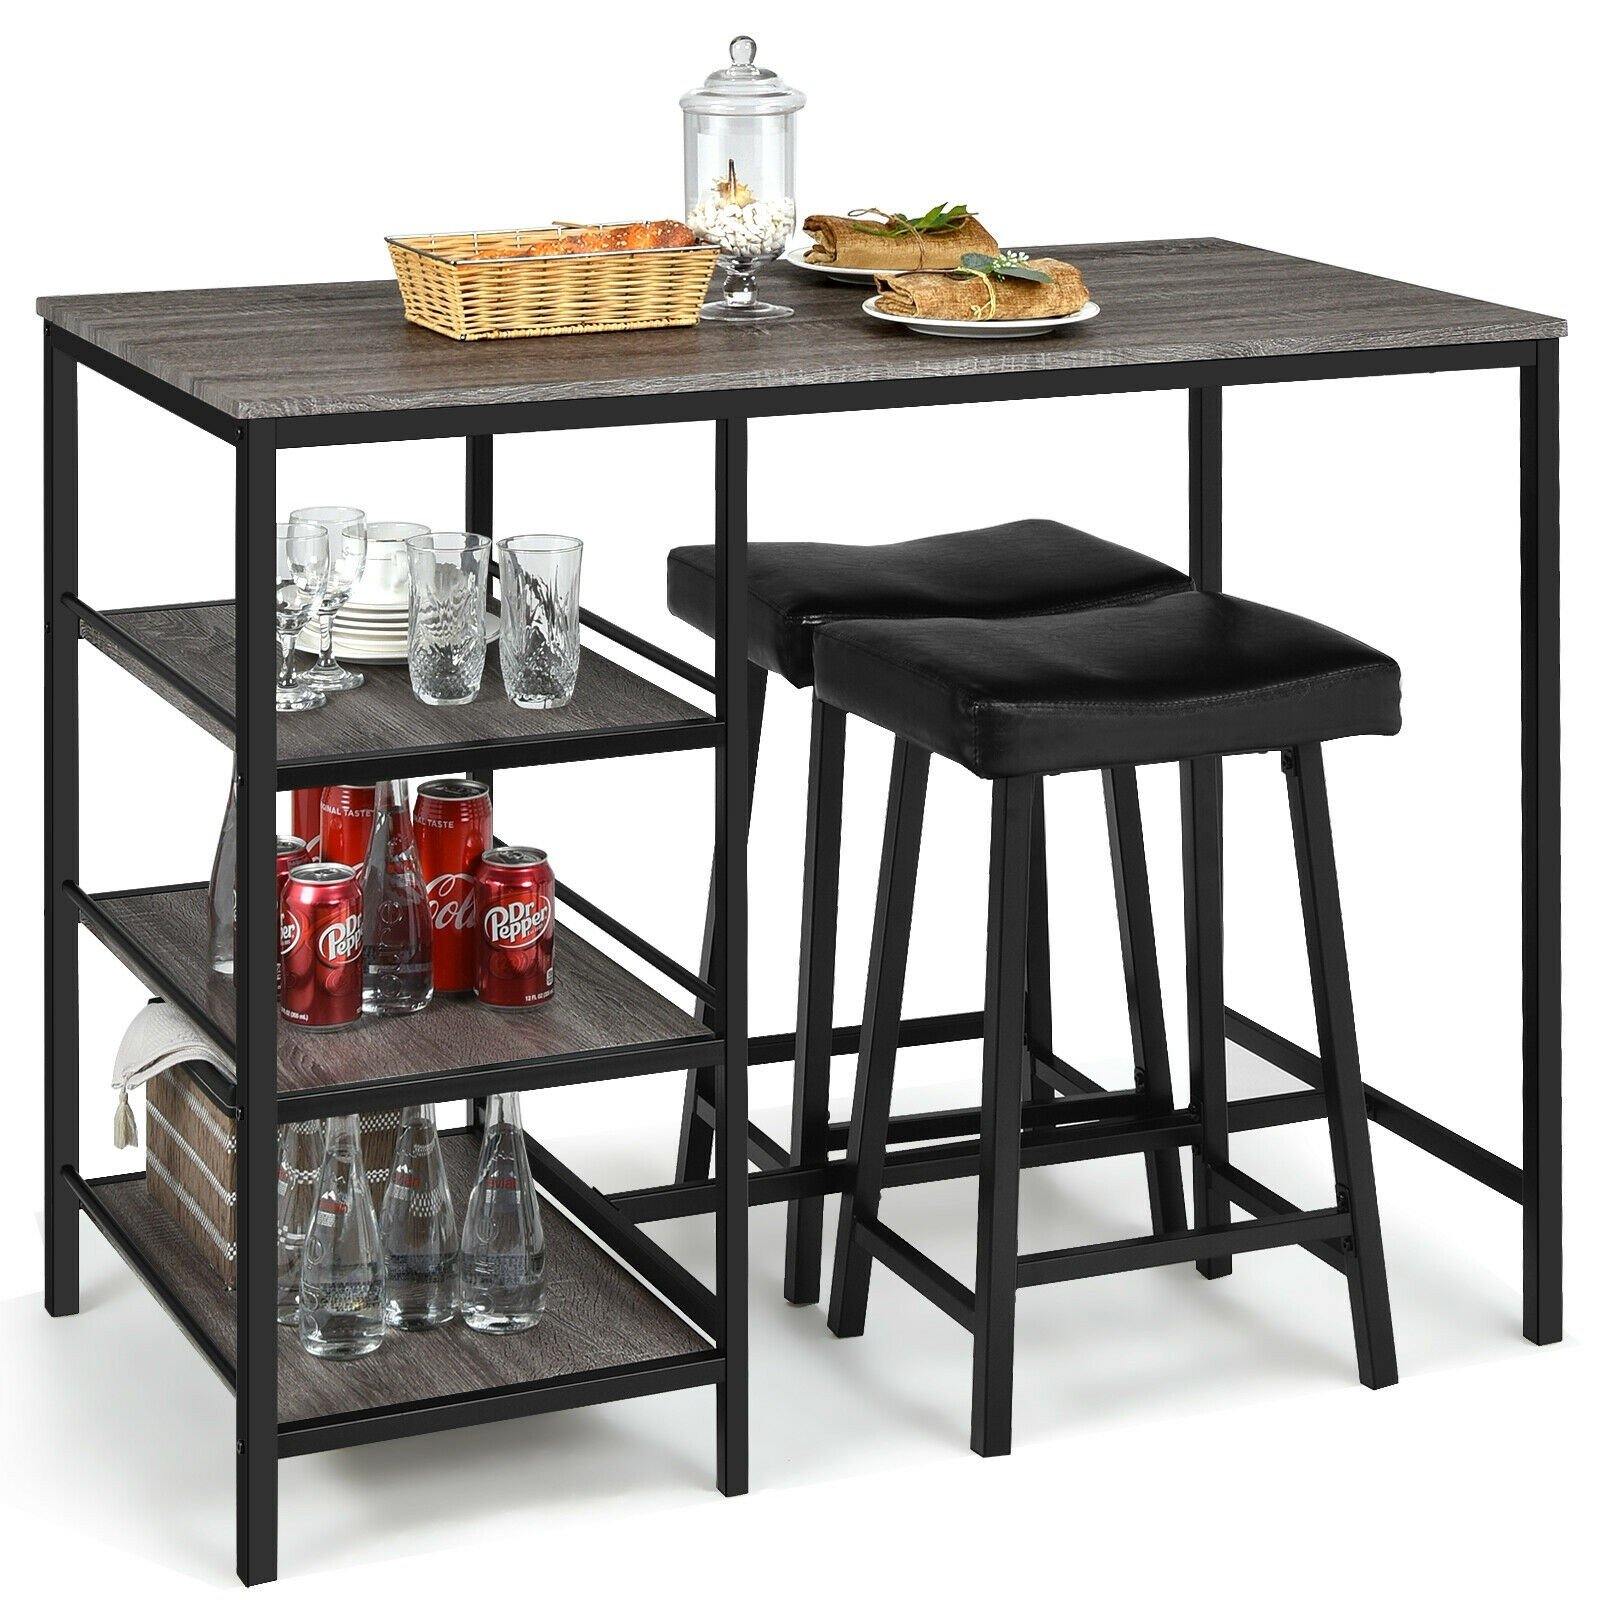 3 Piece Dining Table Set, Counter Height Pub Table & Chairs Set, 3 Tier Storage Shelves, 47 x 23.5 x 36 Inch - Giantexus